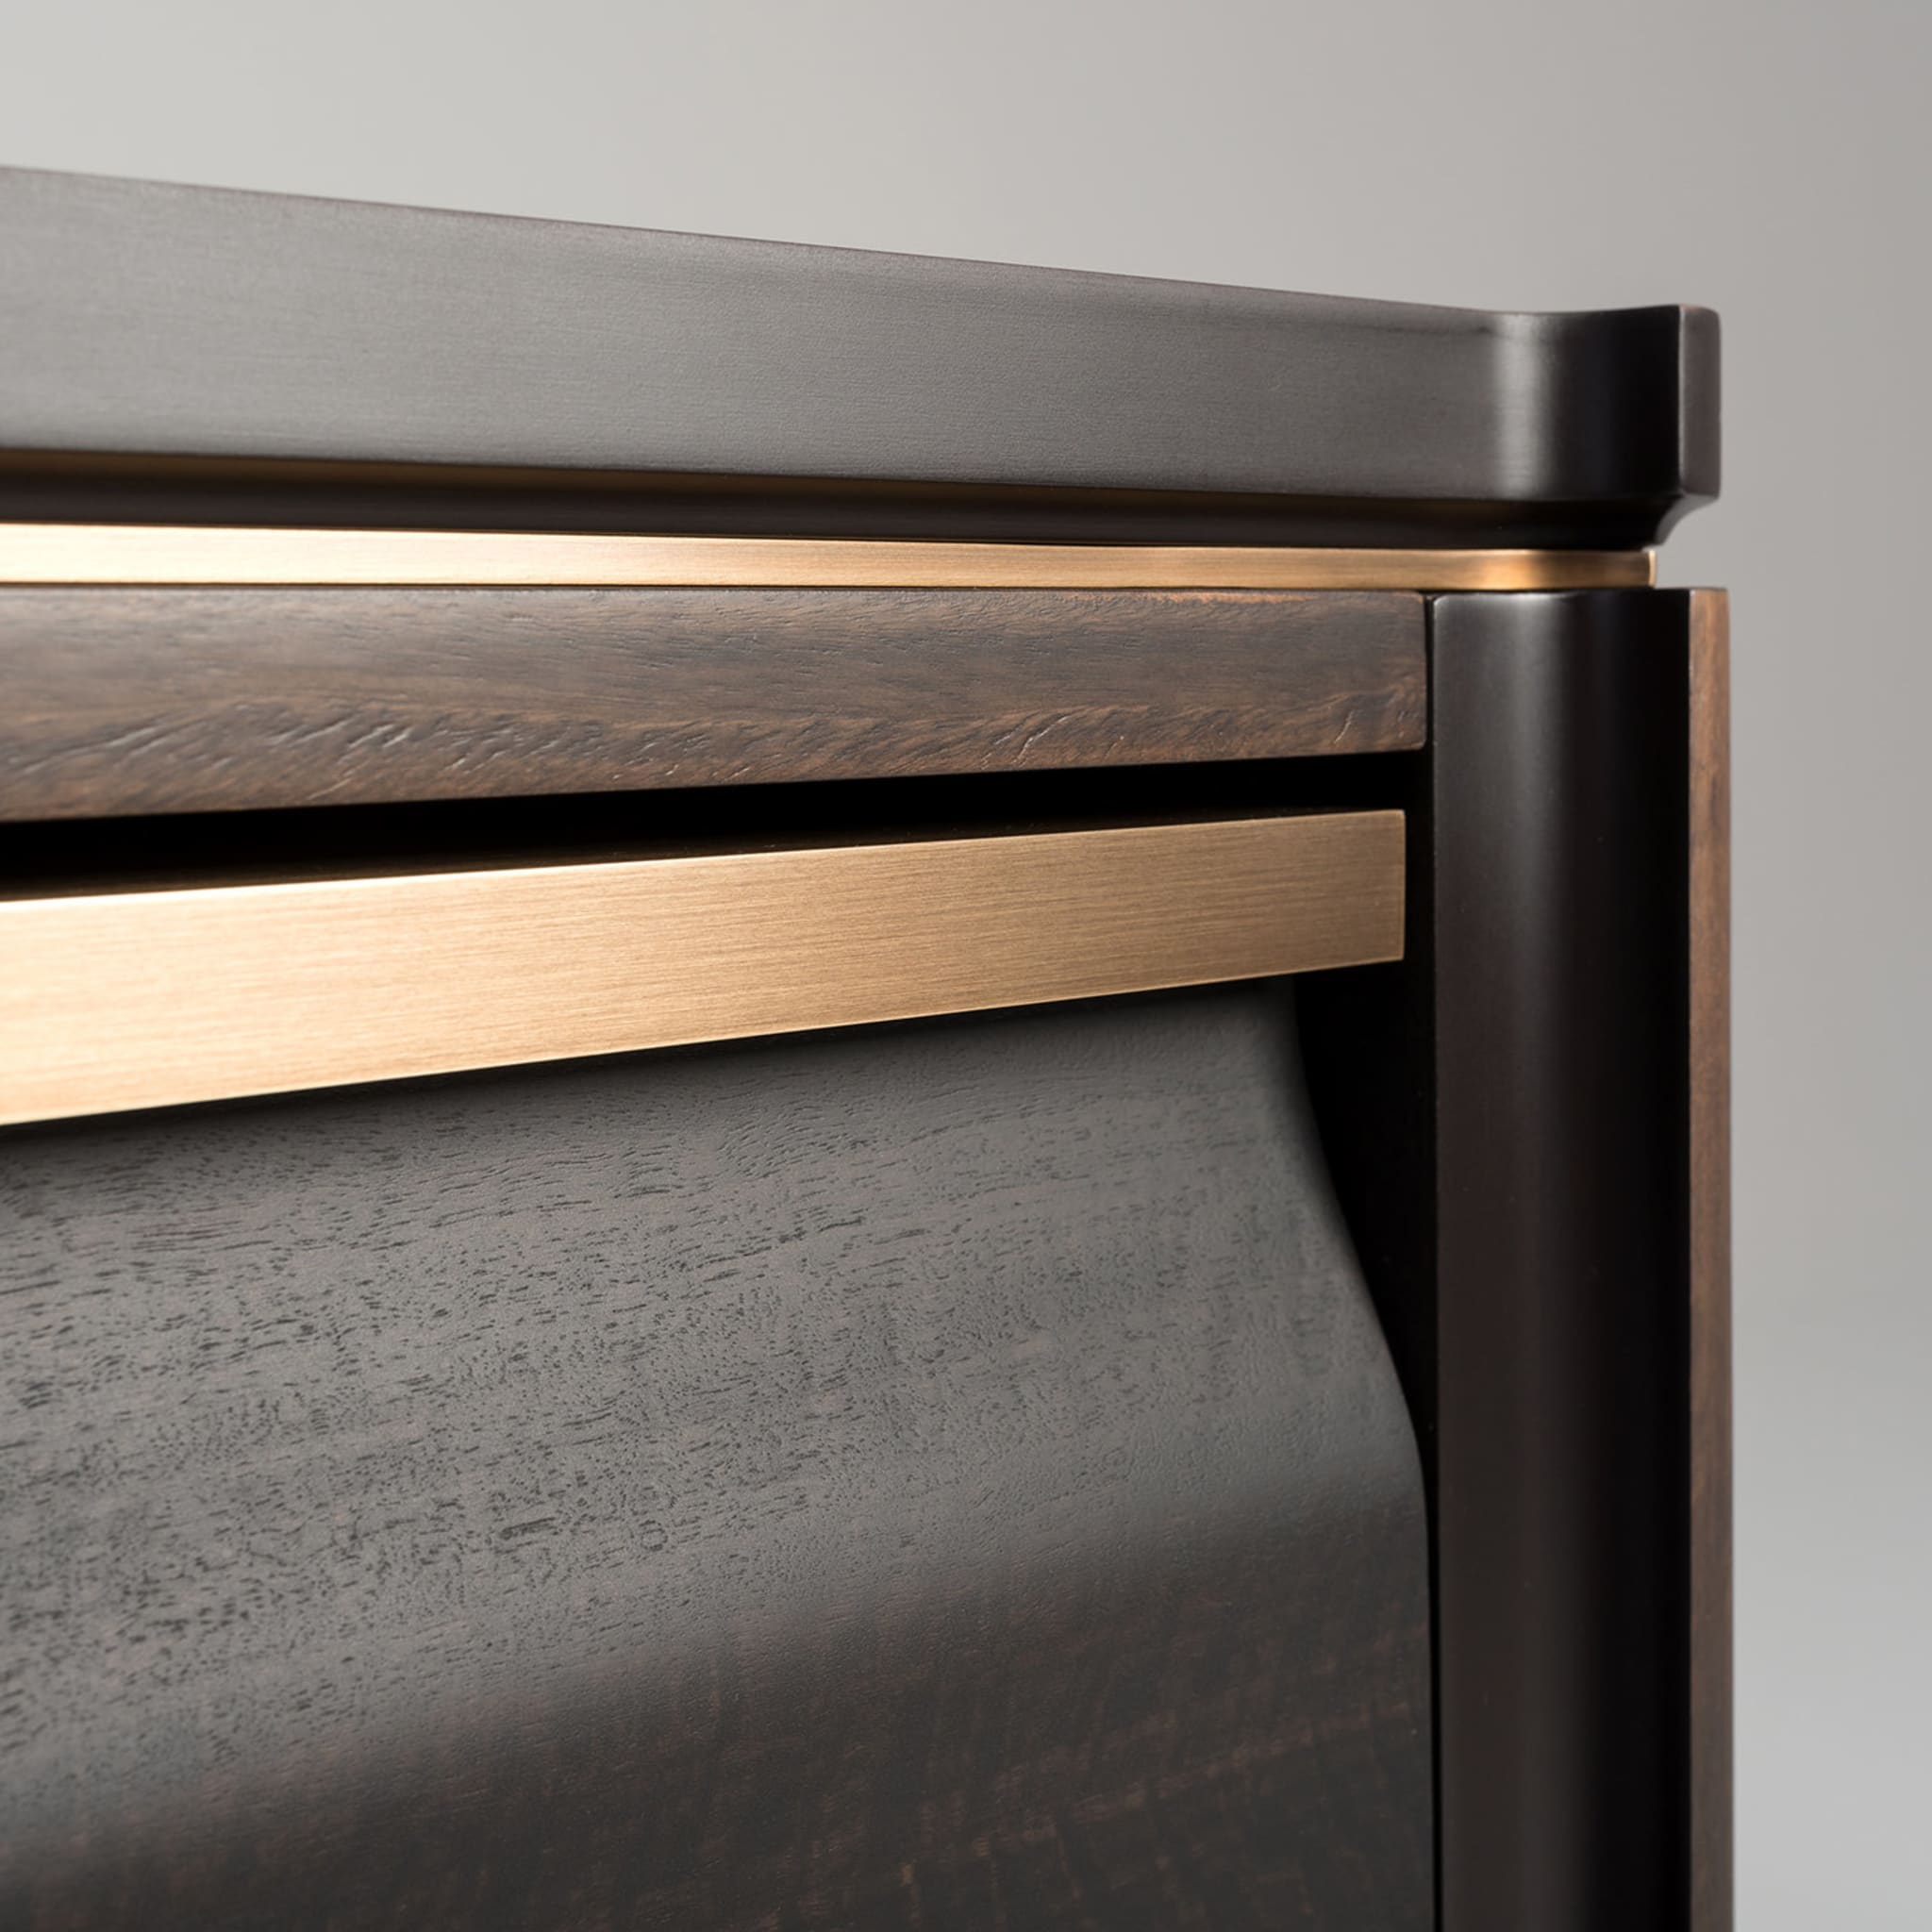 Ercole chest of drawers by Marco and Giulio Mantellassi - Alternative view 2